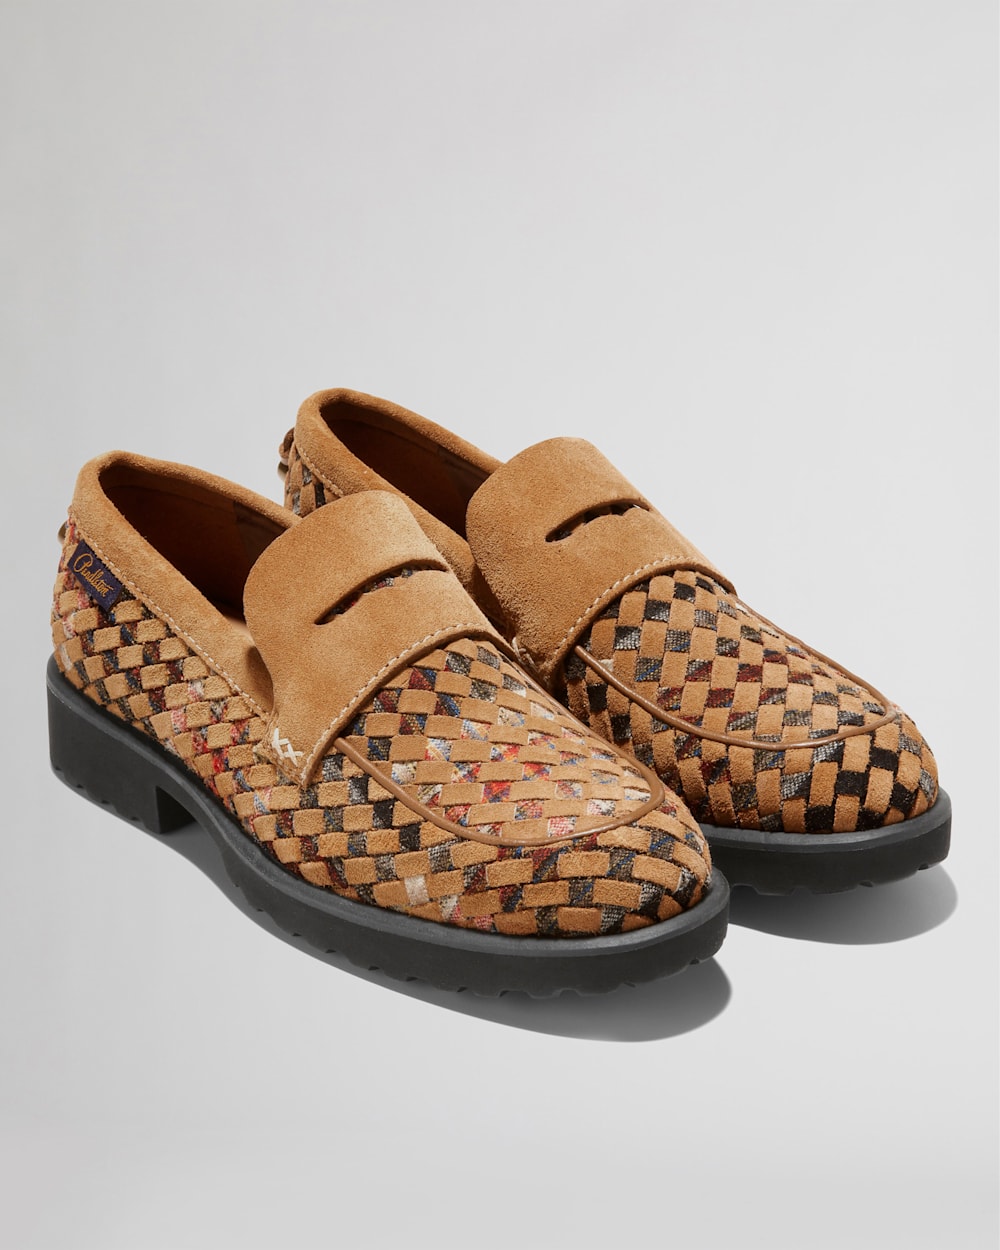 ALTERNATE VIEW OF COLE HAAN X PENDLETON WOMEN'S GENEVA PENNY LOAFERS IN ACADIA PLAID image number 5